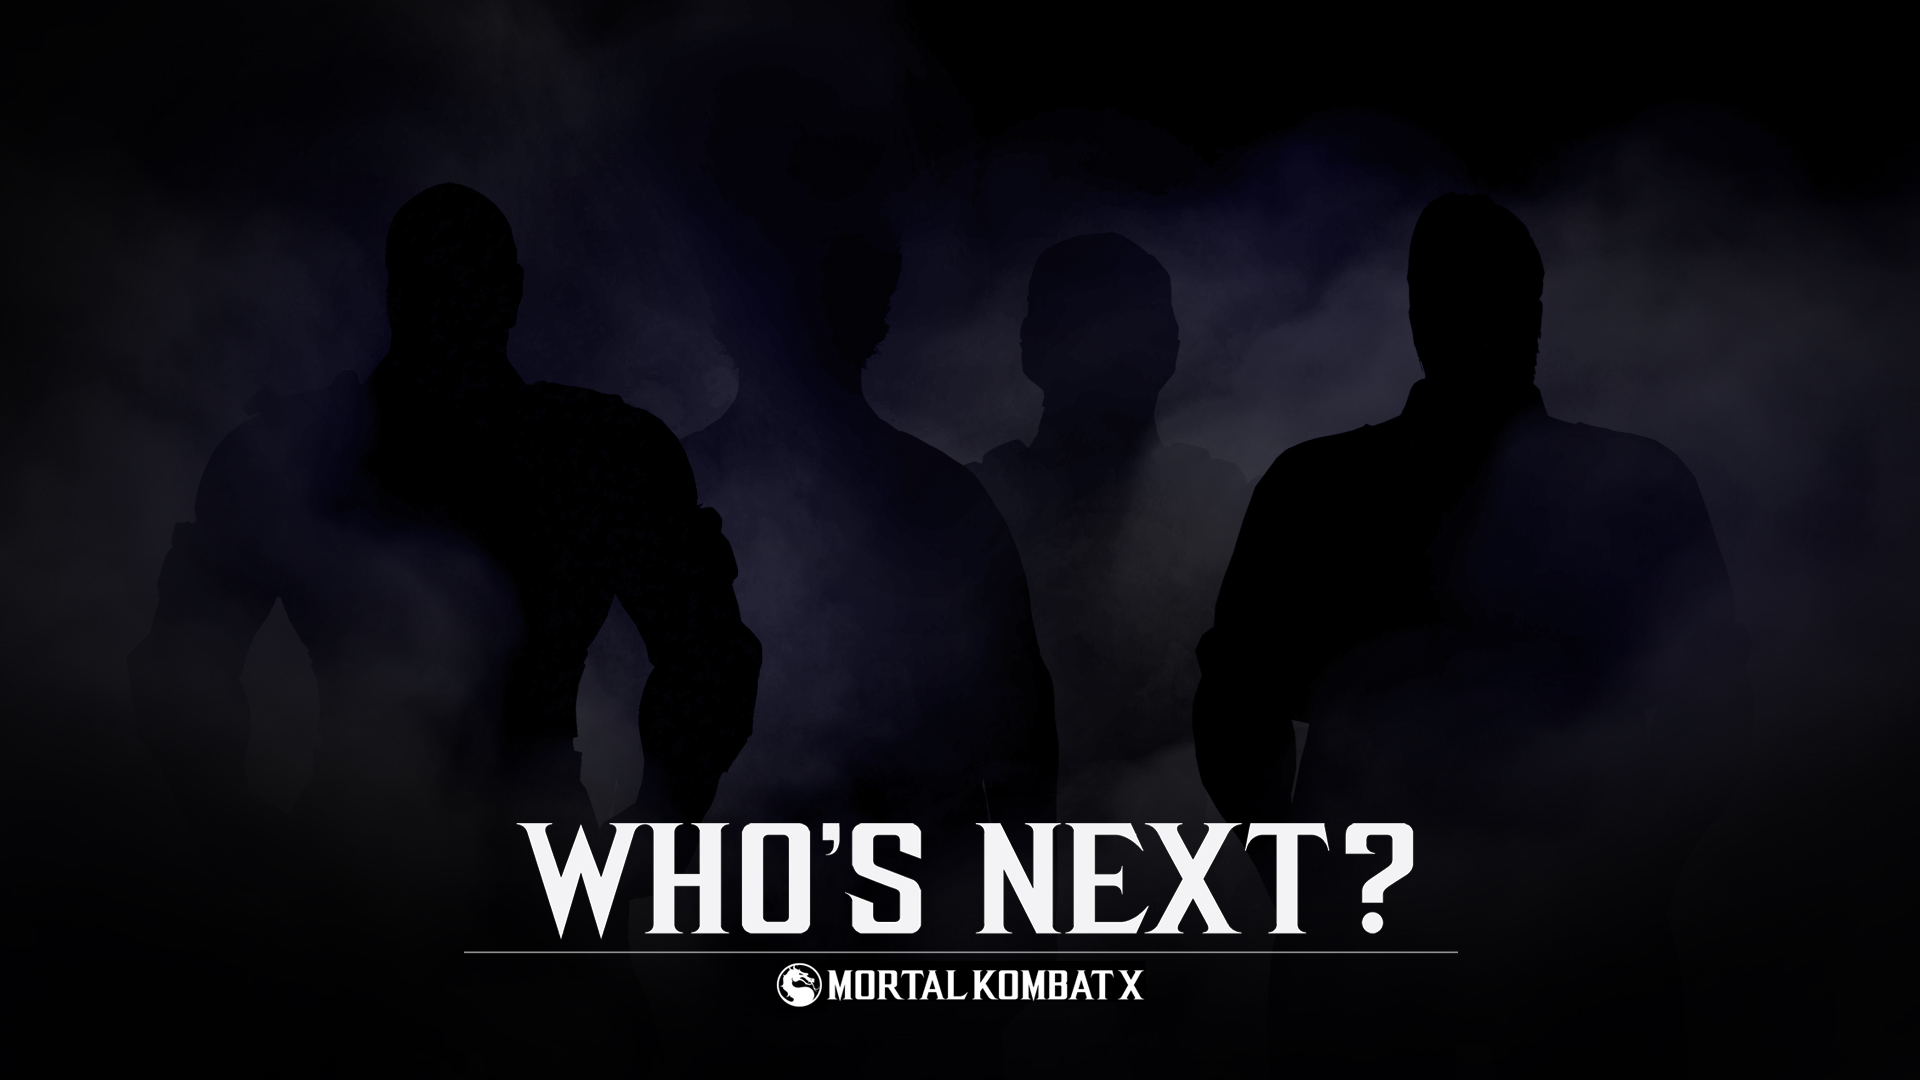 New Characters, Skins, and More Coming to Mortal Kombat X in 2016